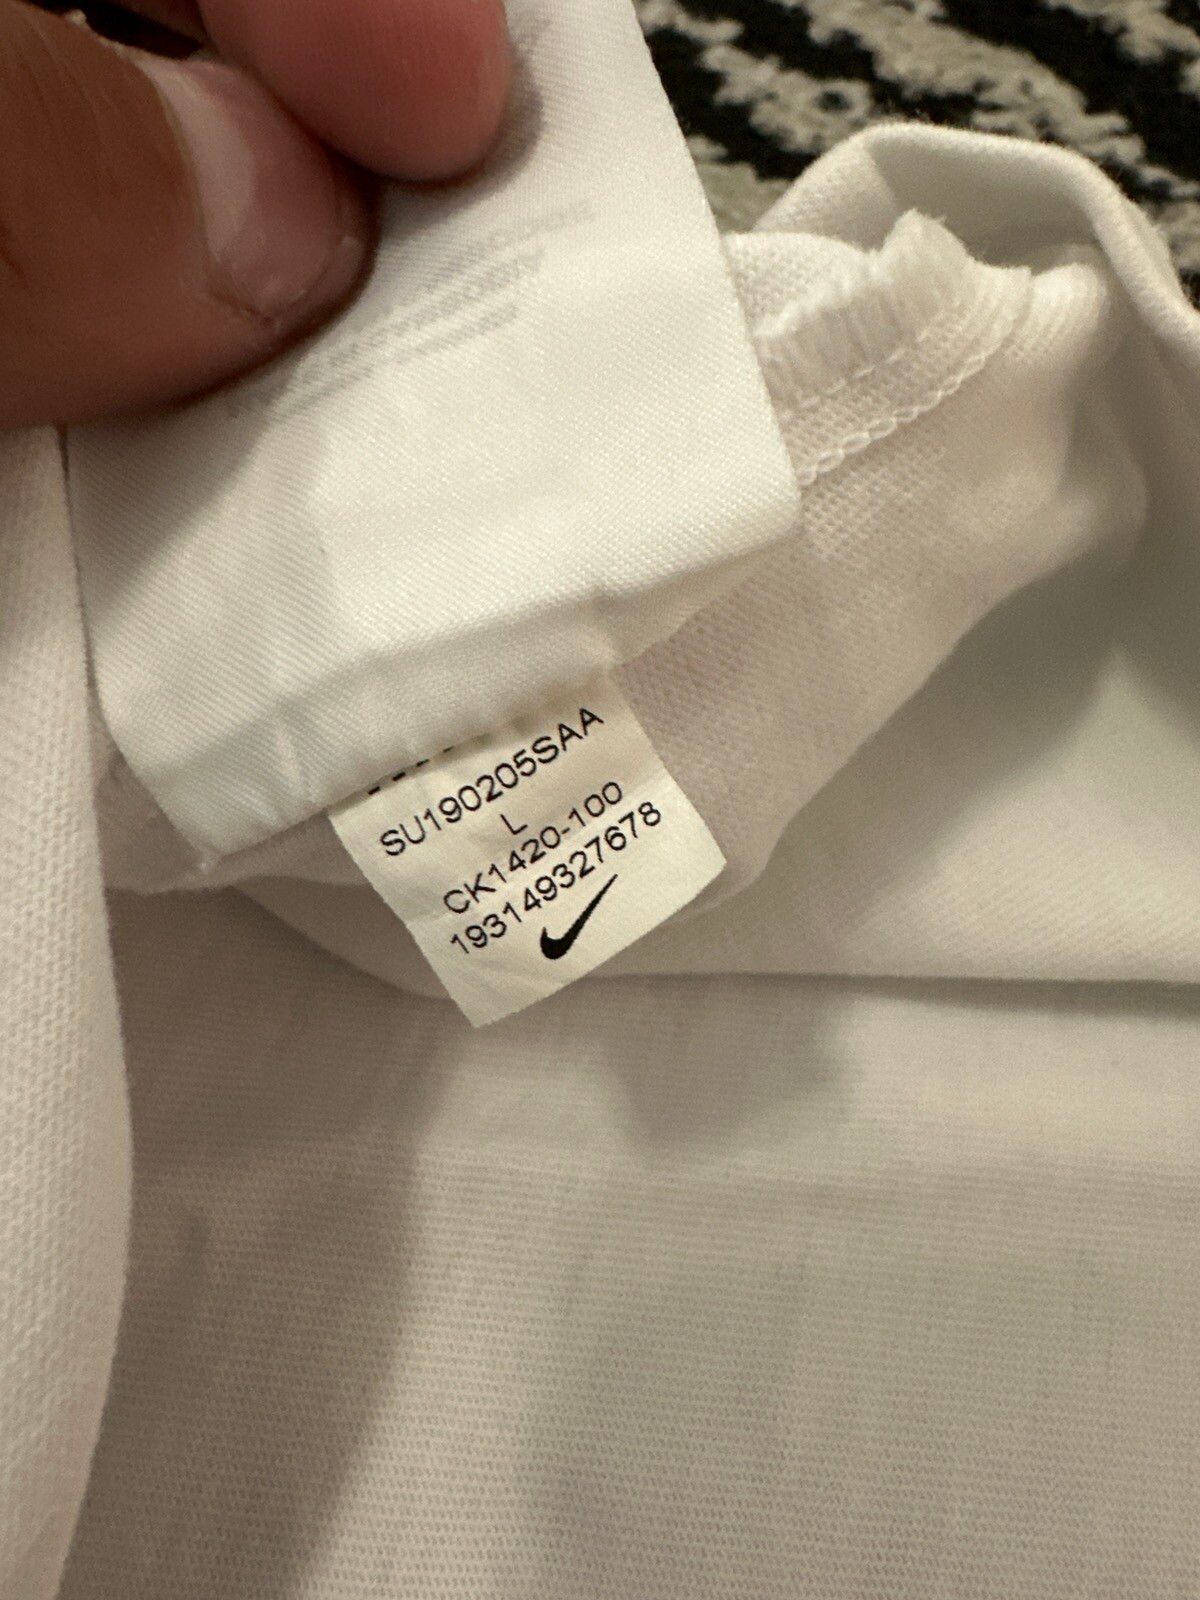 Nike Fear Of God x Nike Air Fear Of God Center Swoosh Tee White Size US L / EU 52-54 / 3 - 5 Preview